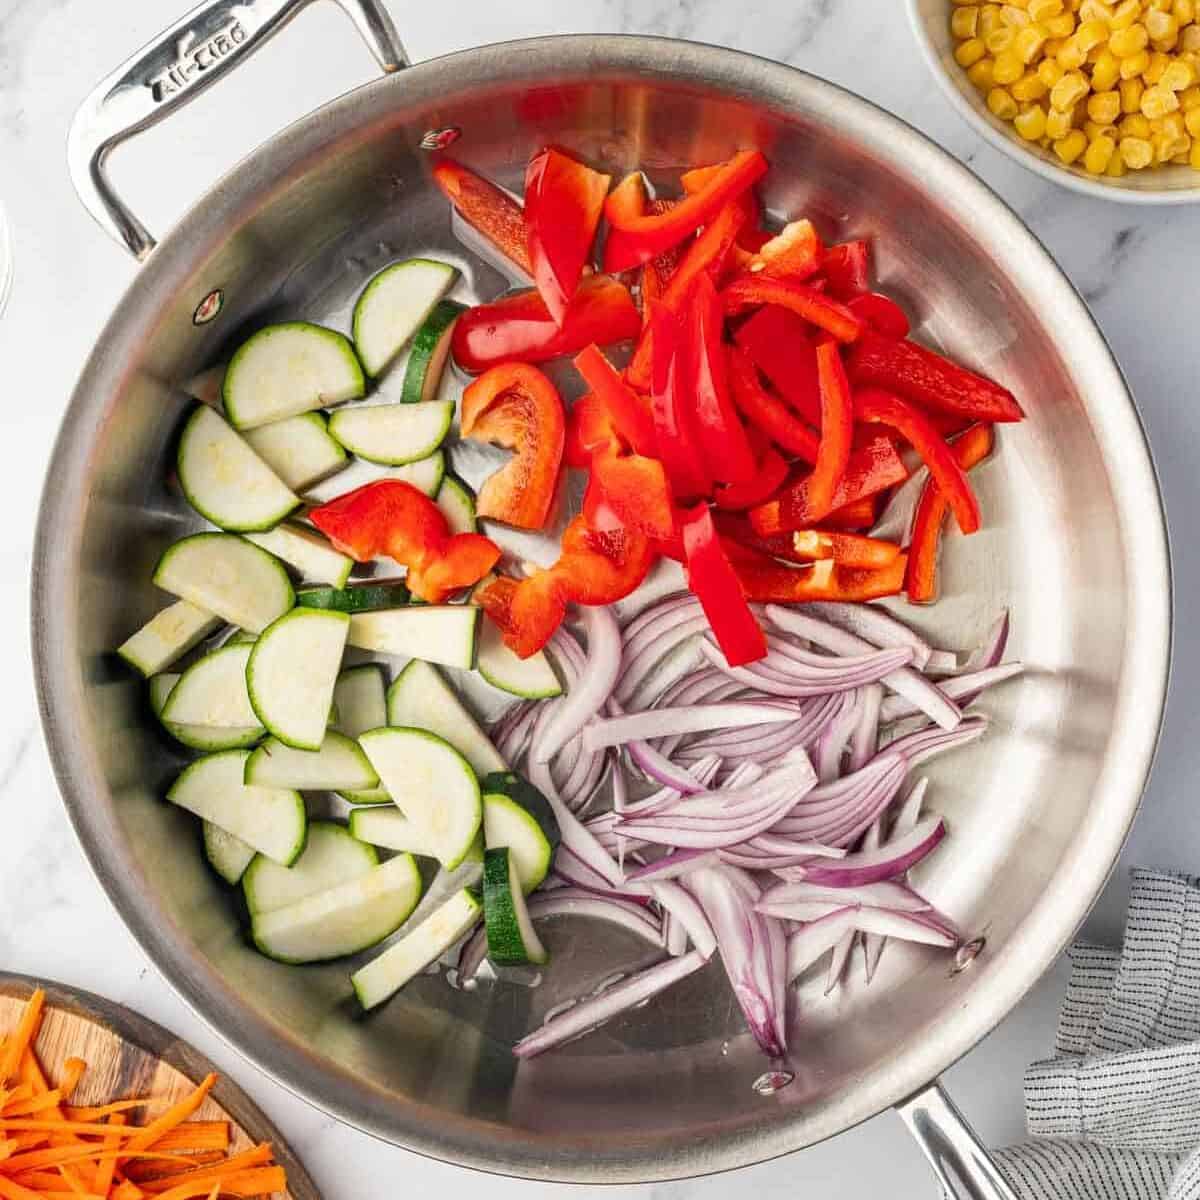 Chopped vegetables are added to a skillet to saute.